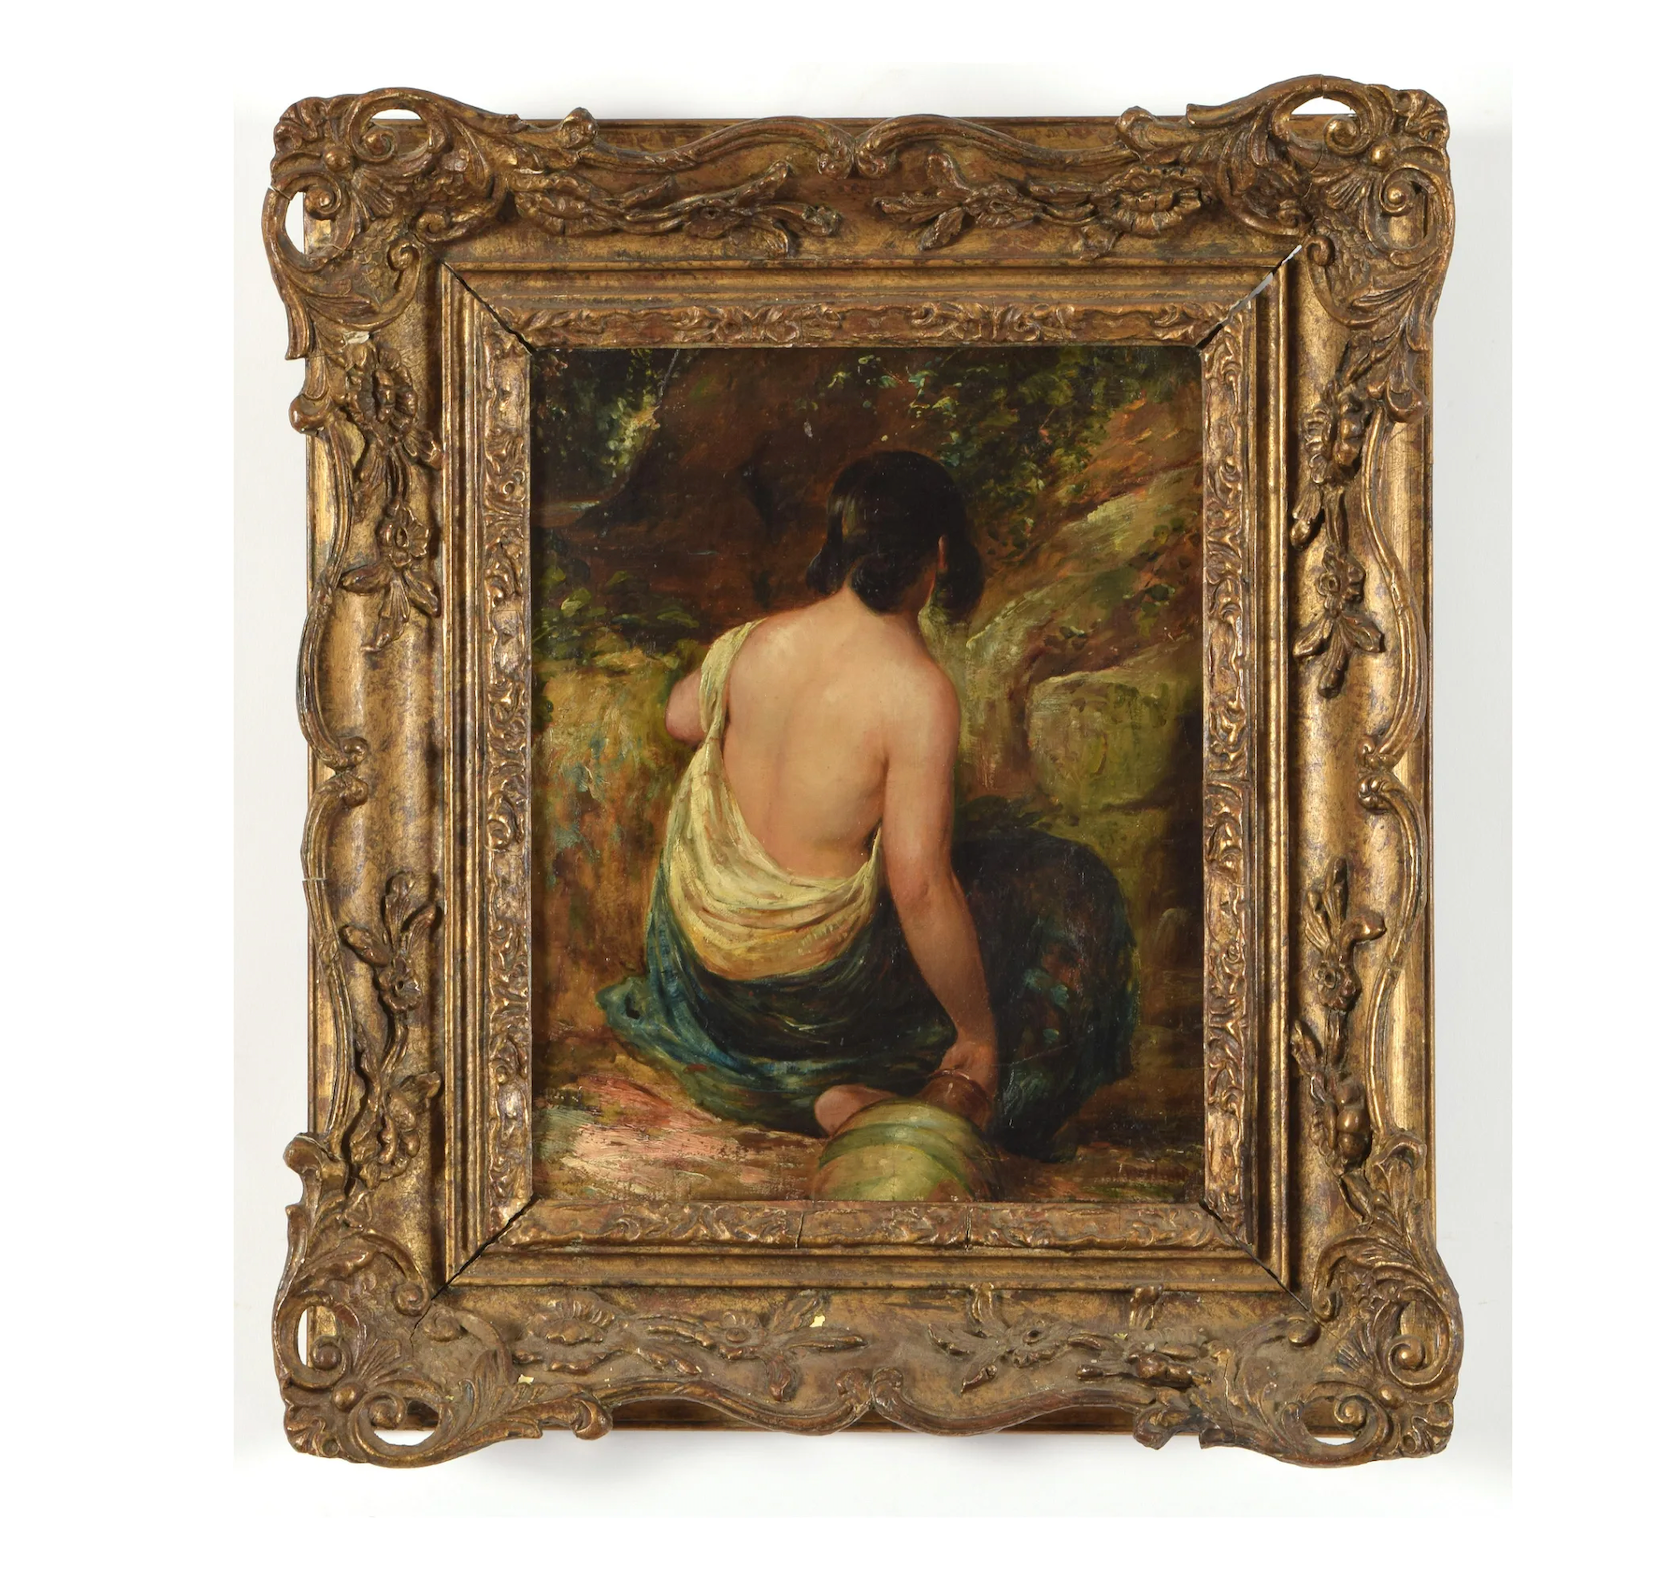 AW605: : Mid 19th C European School -Oil on Canvas - Genre Scene Woman at Well